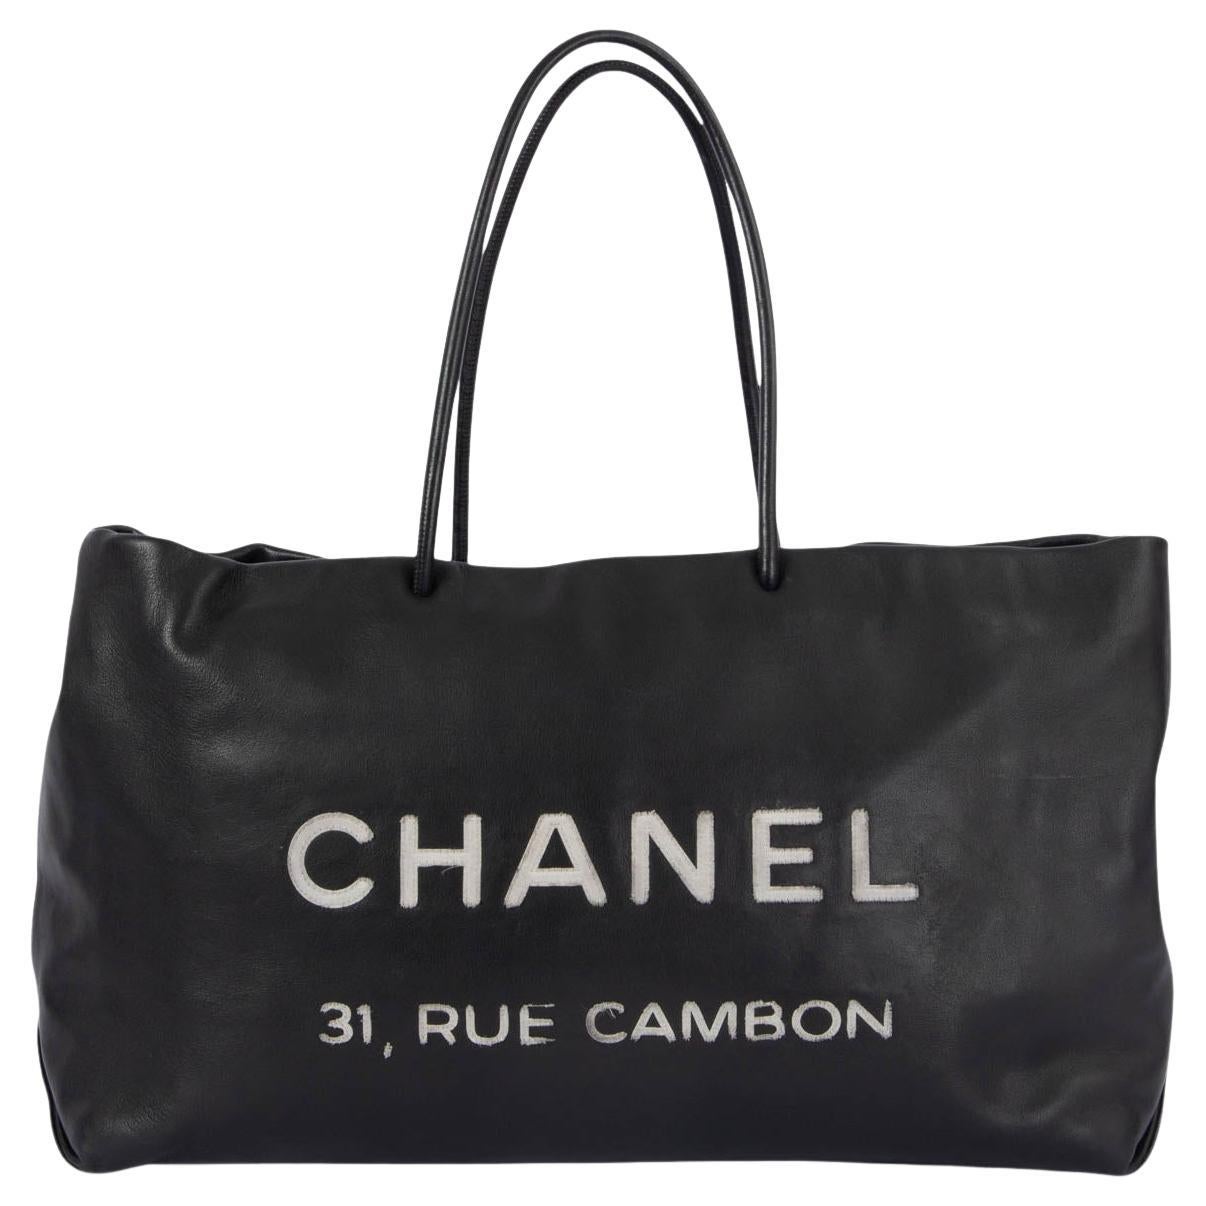 Honest Chanel Deauville Tote Review: Worth it?